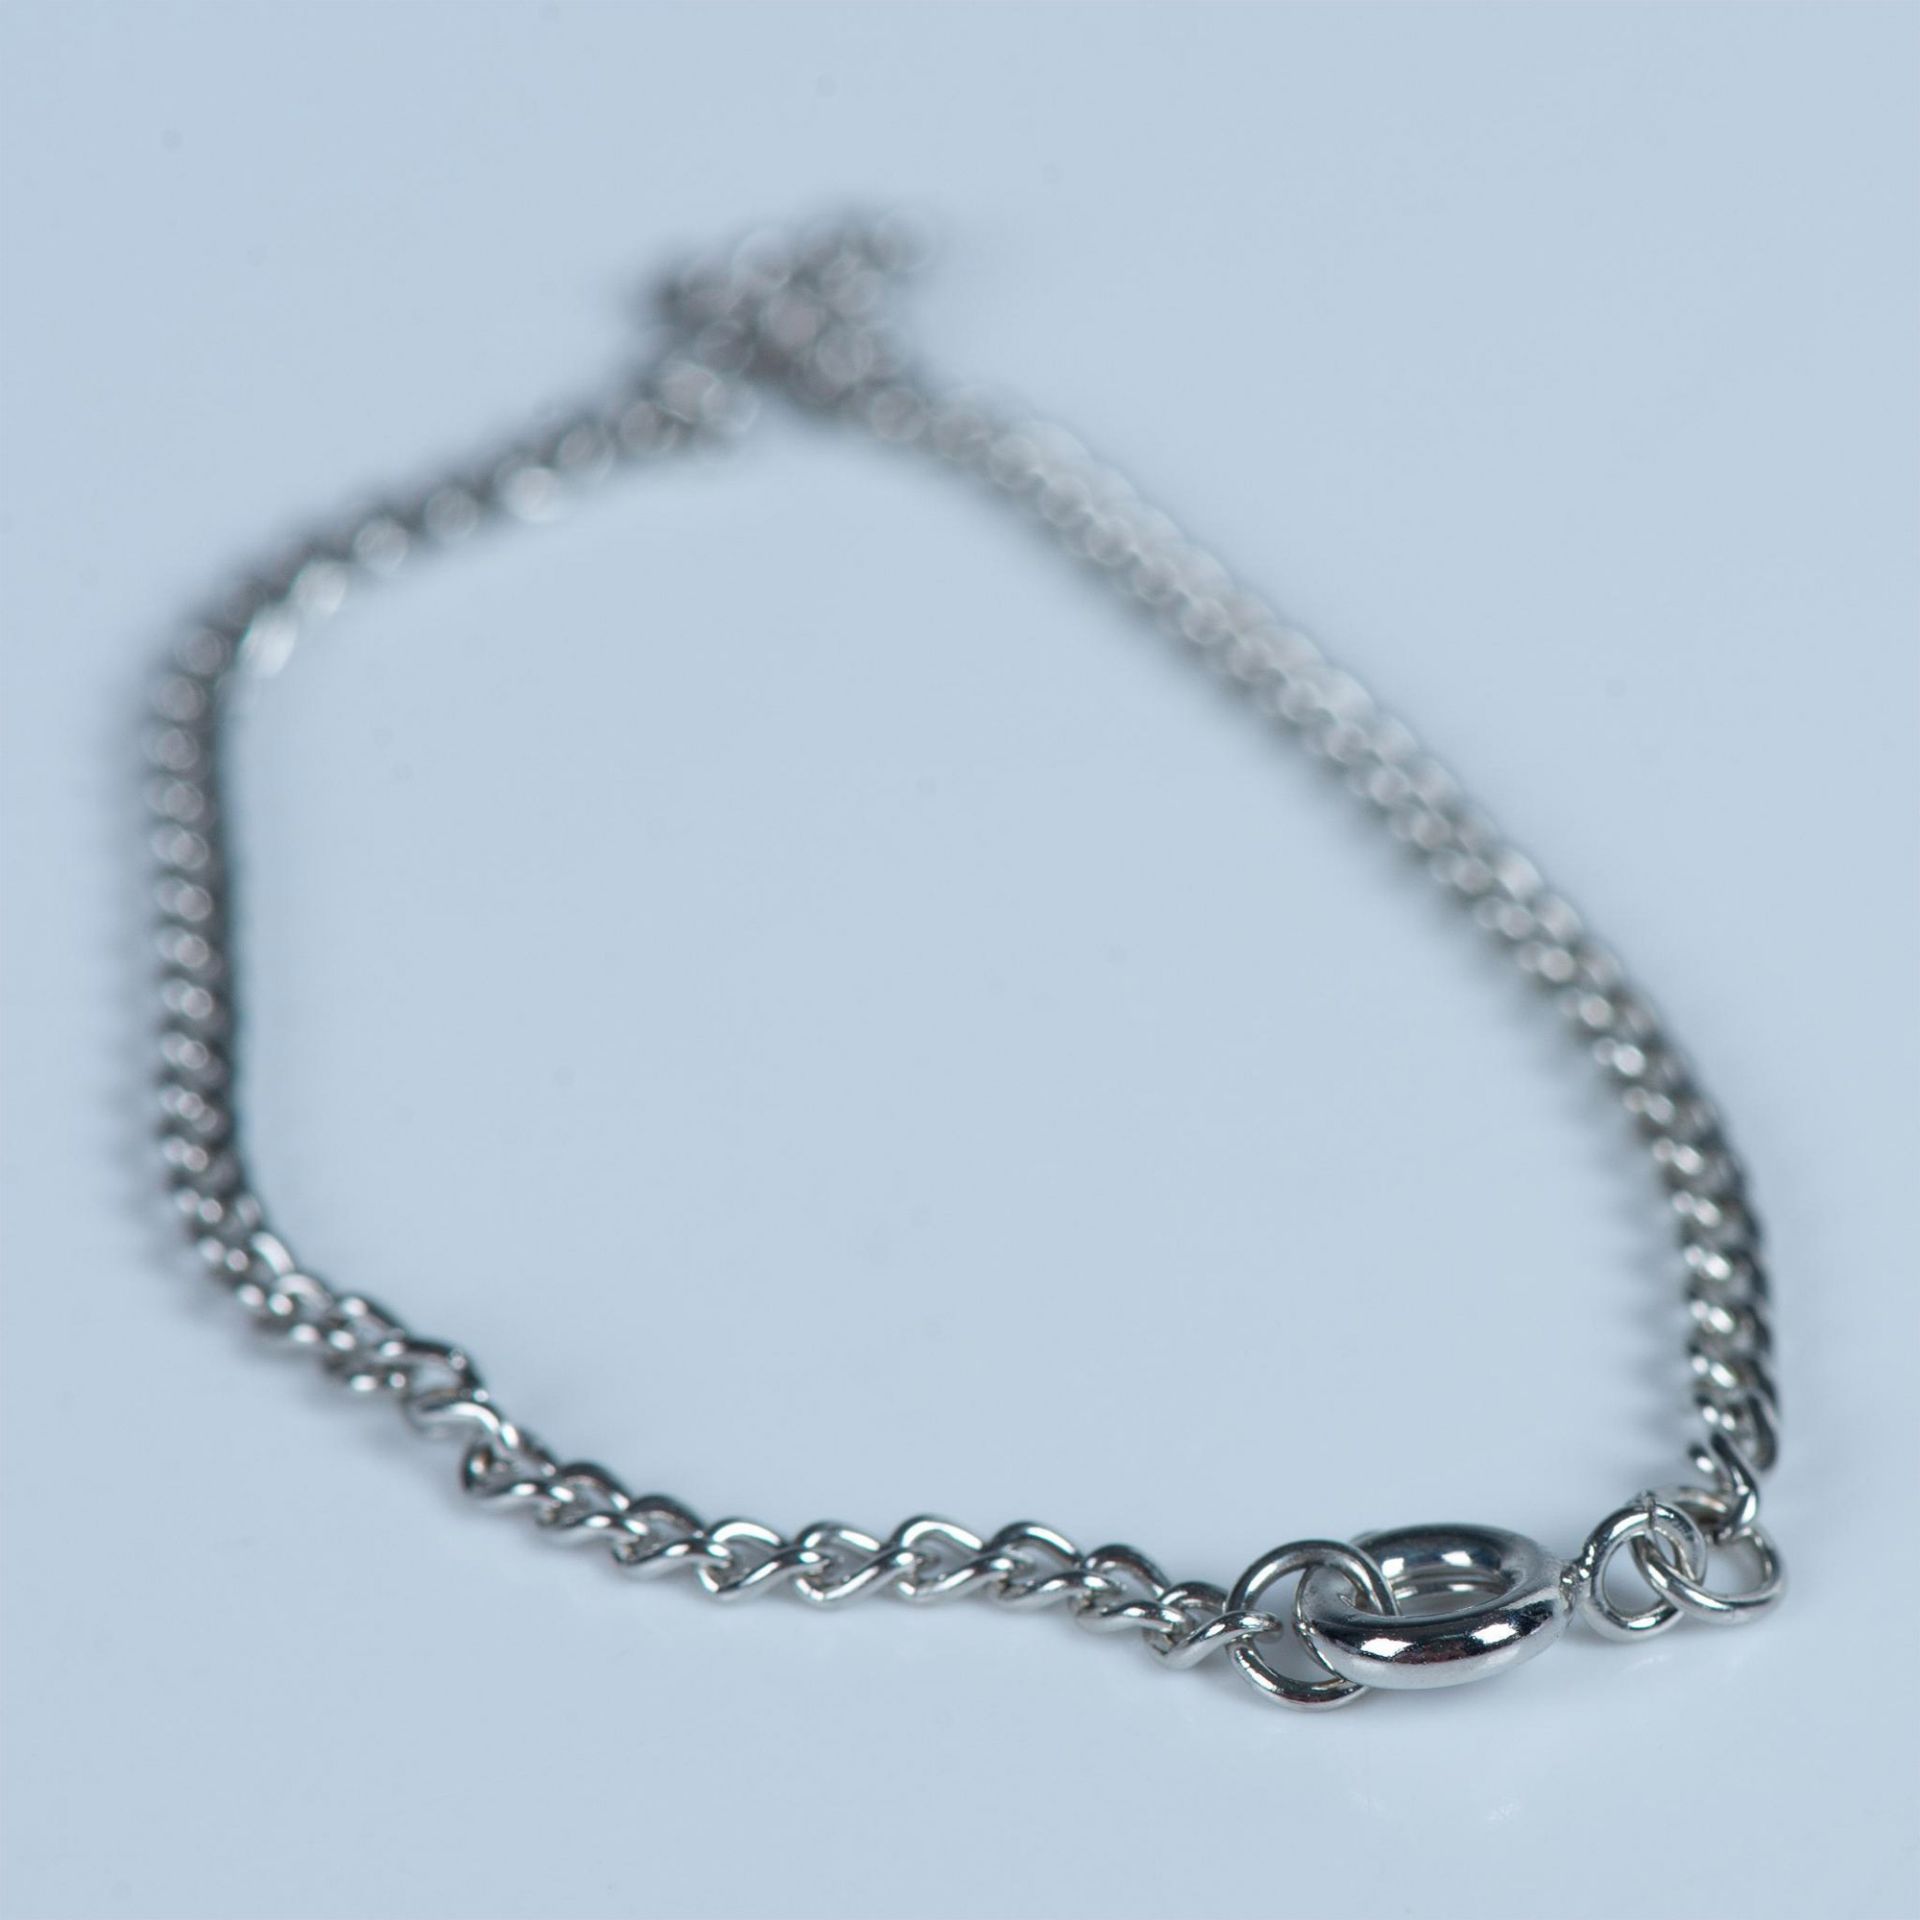 5pc Silver Tone Necklaces and Bracelet - Image 2 of 10